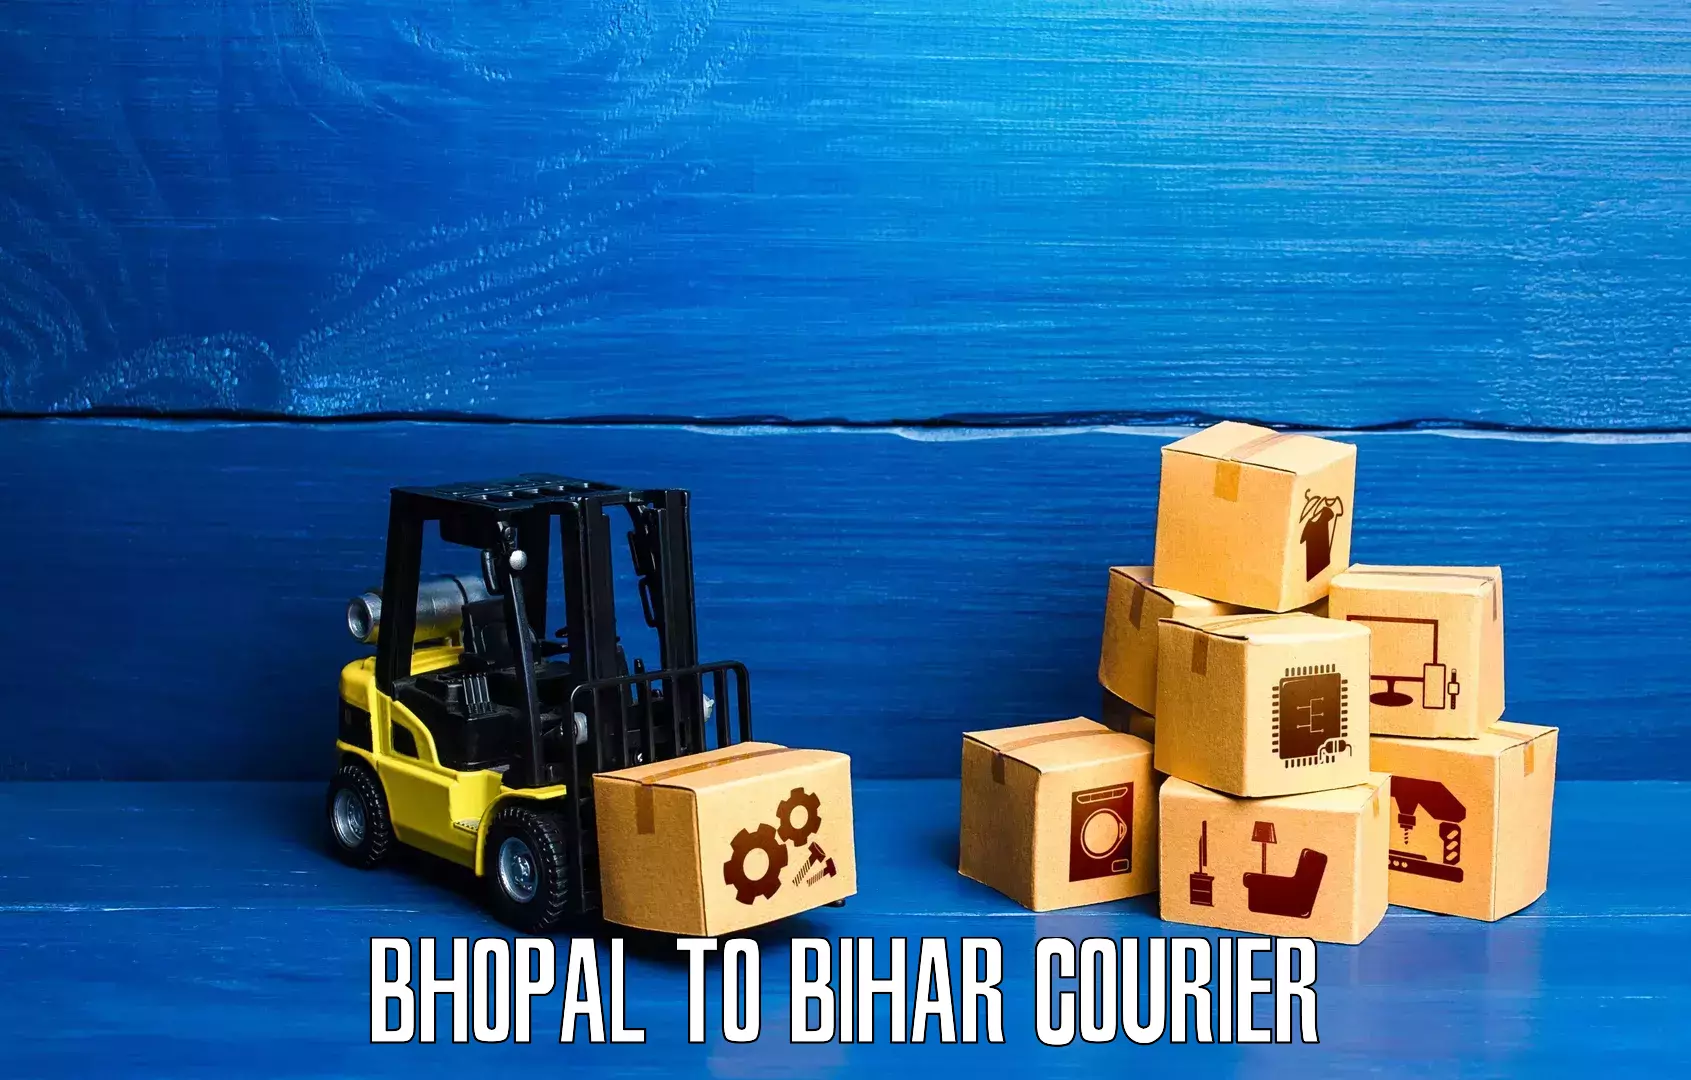 Comprehensive shipping network Bhopal to Bihar